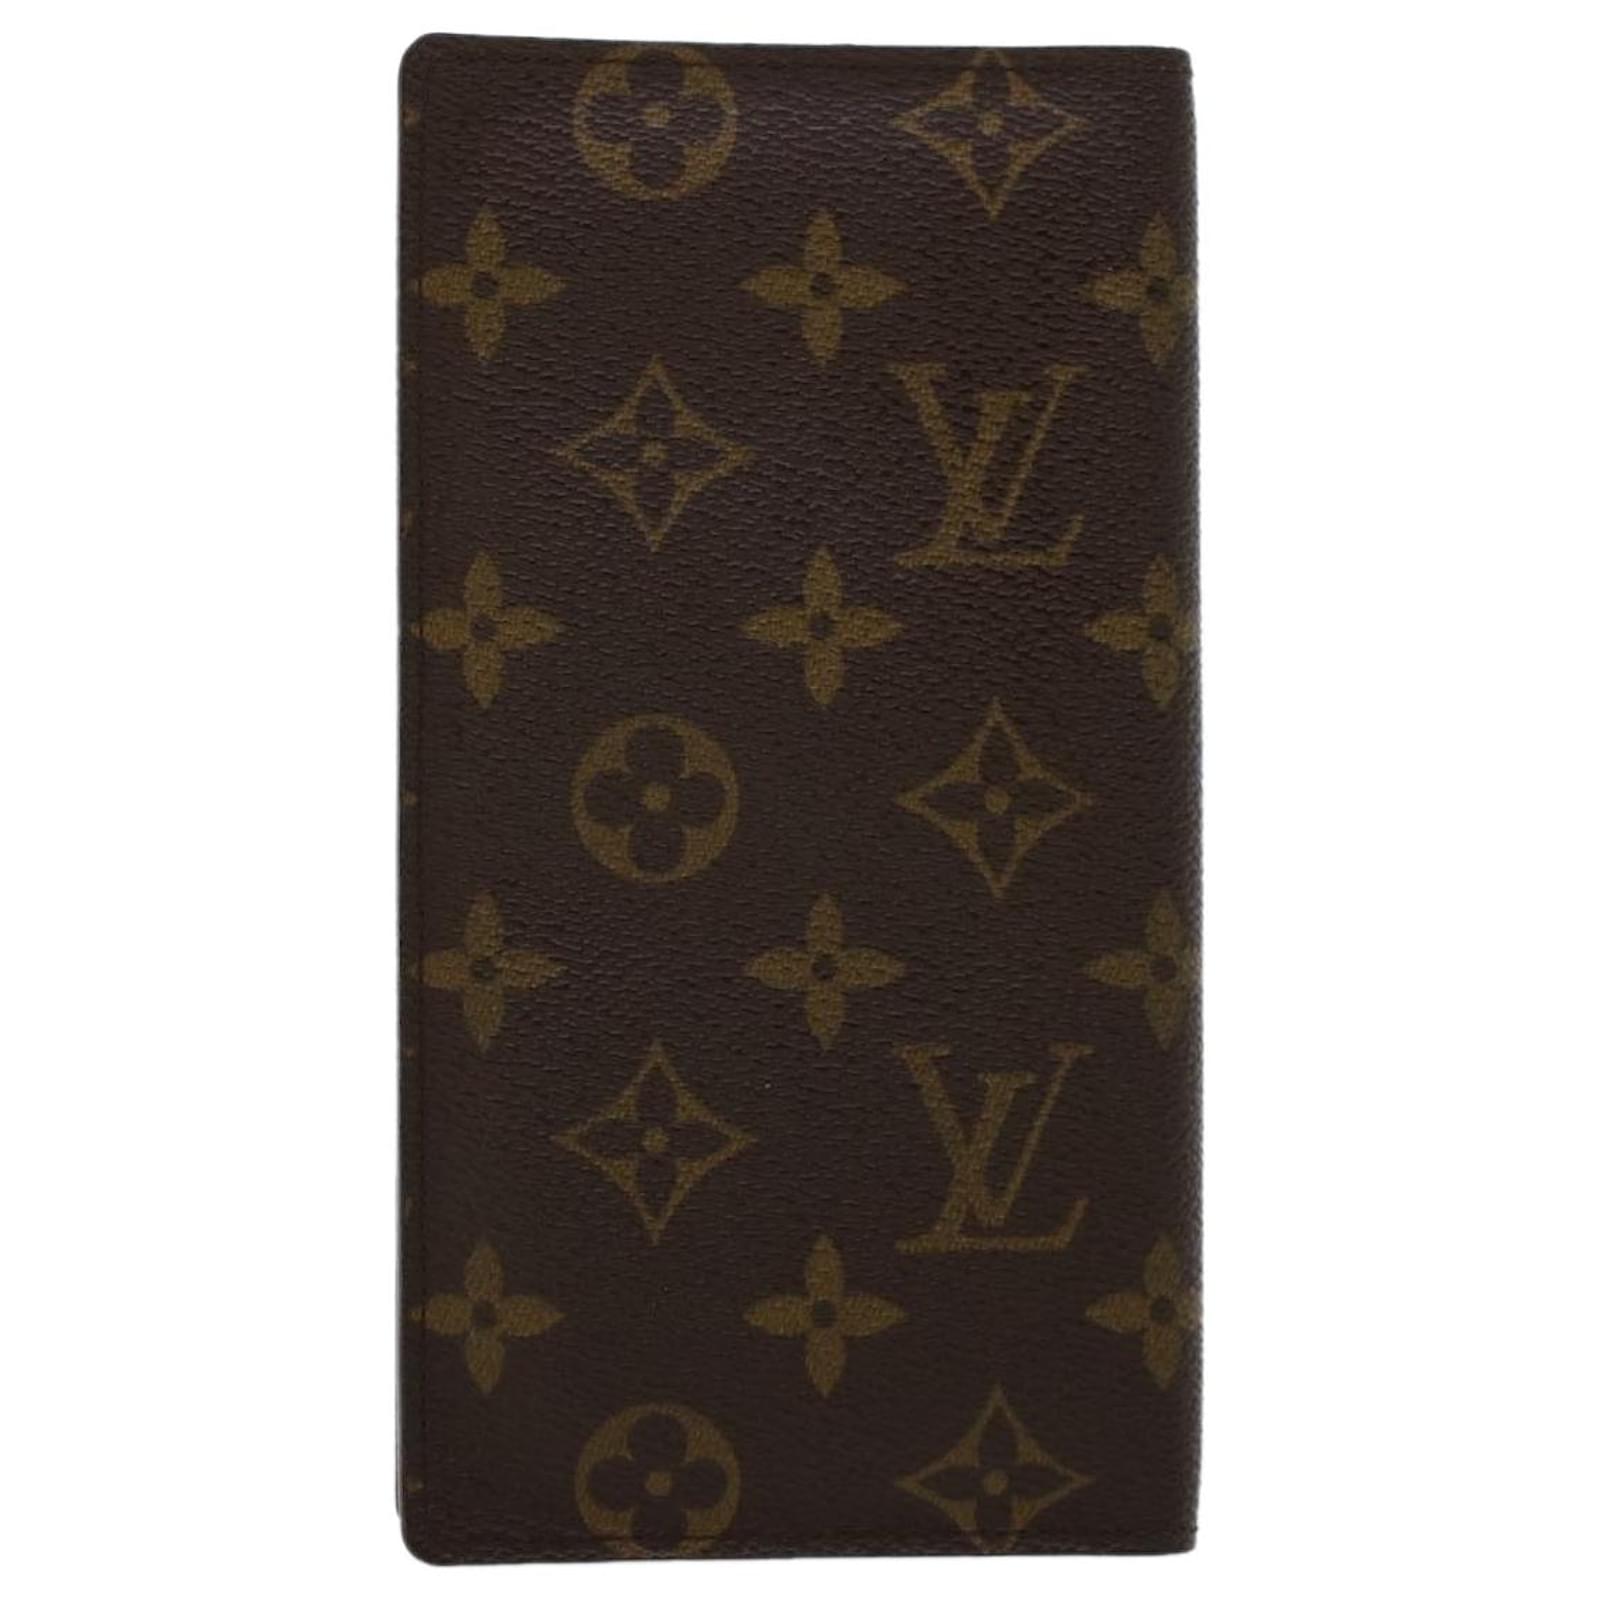 New in Box Louis Vuitton 2 Tone Credit Card Case